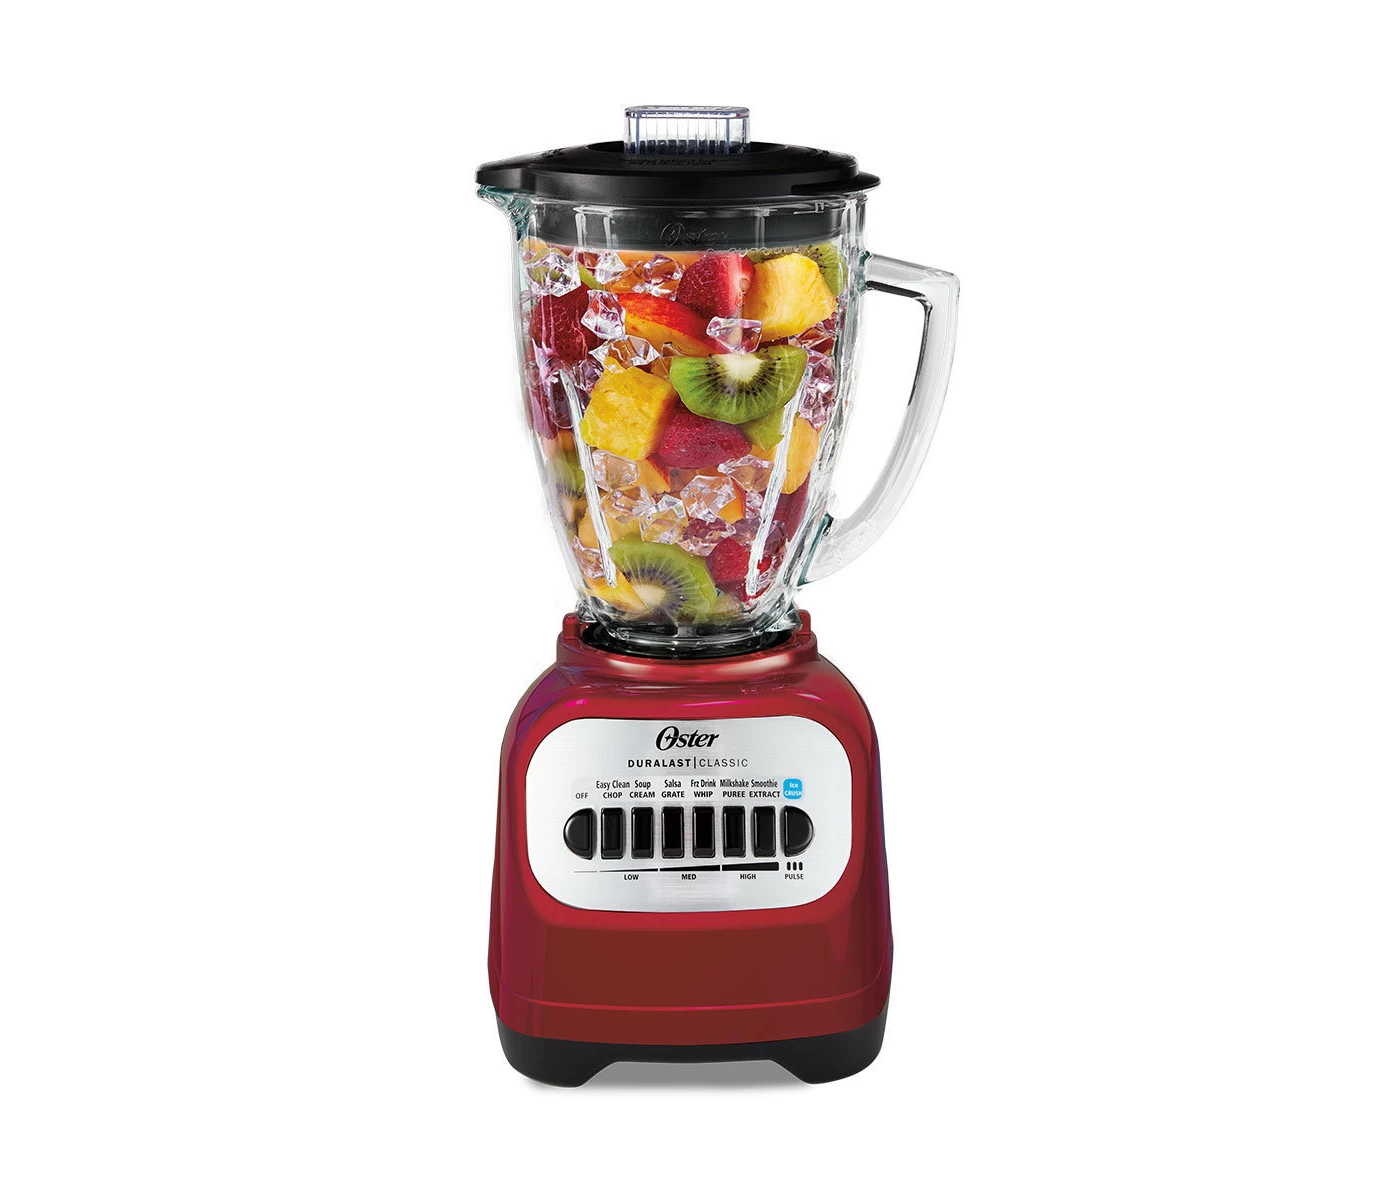 Oster Classic Series Blender with Travel Smoothie Cup - Red BLSTCG-RBG-000 - image 1 of 4